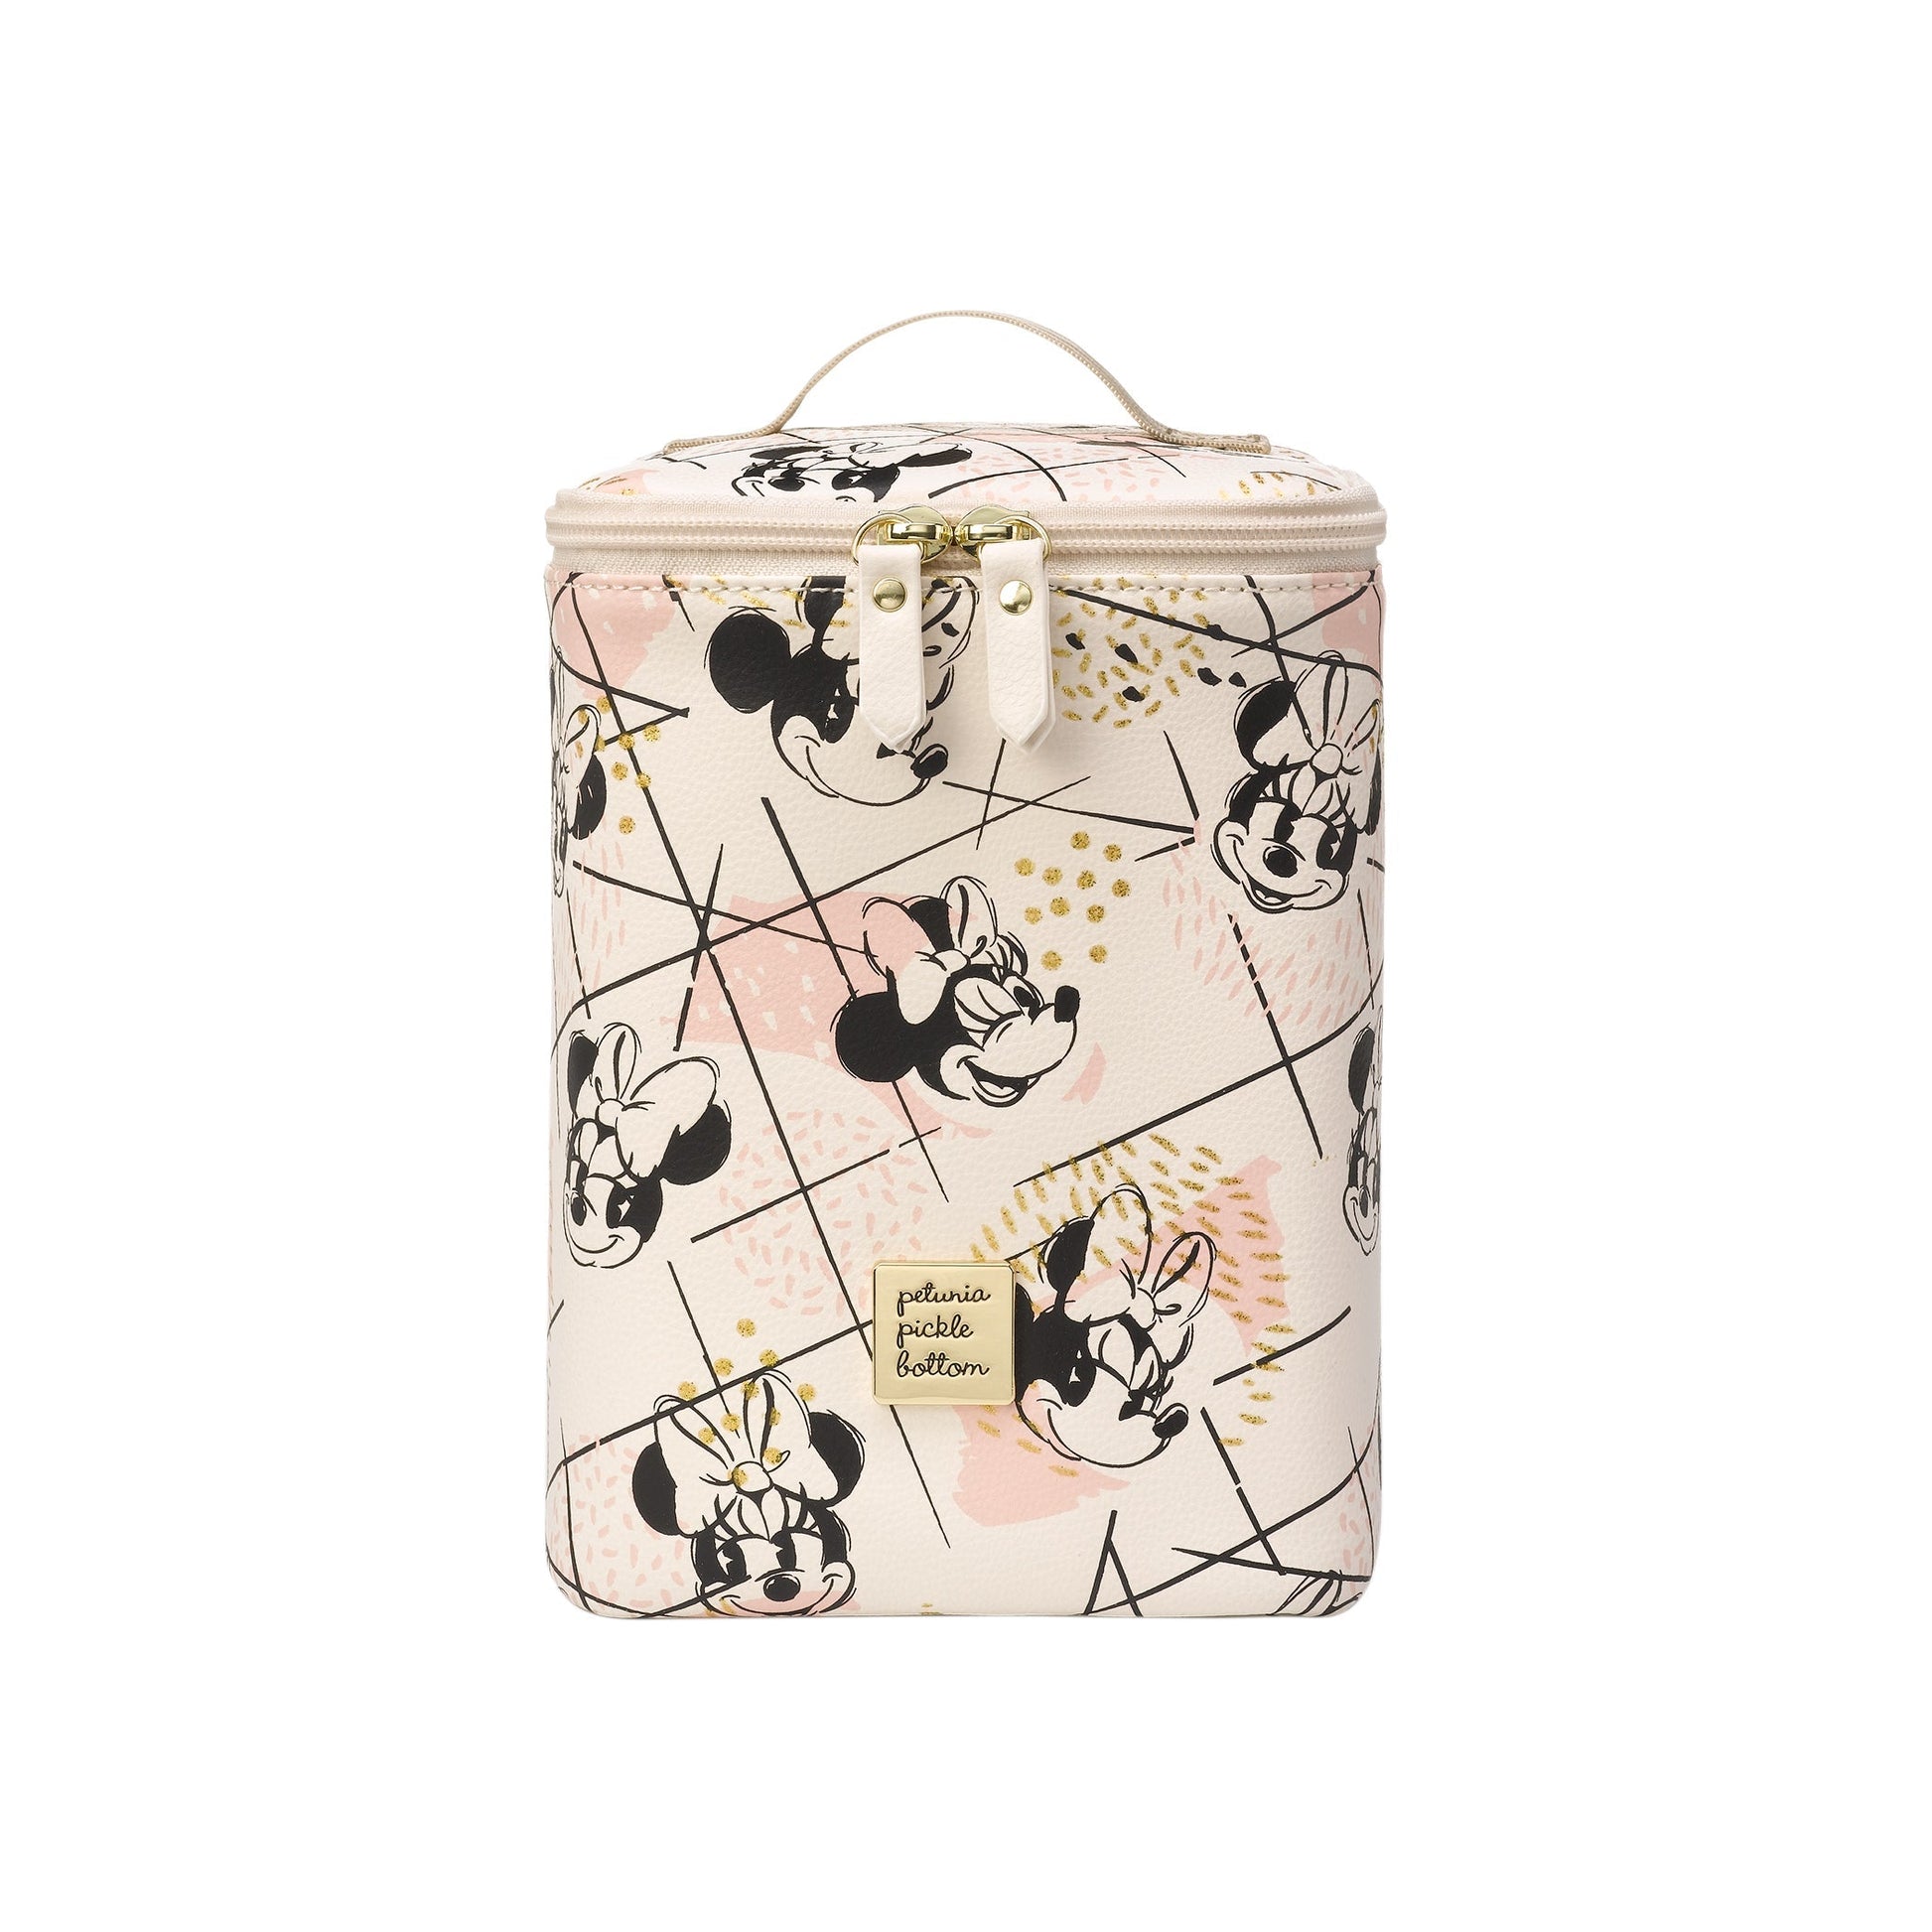 Petunia Pickle Bottom Cool Pixel Plus in Shimmery Minnie Mouse Snack Bag